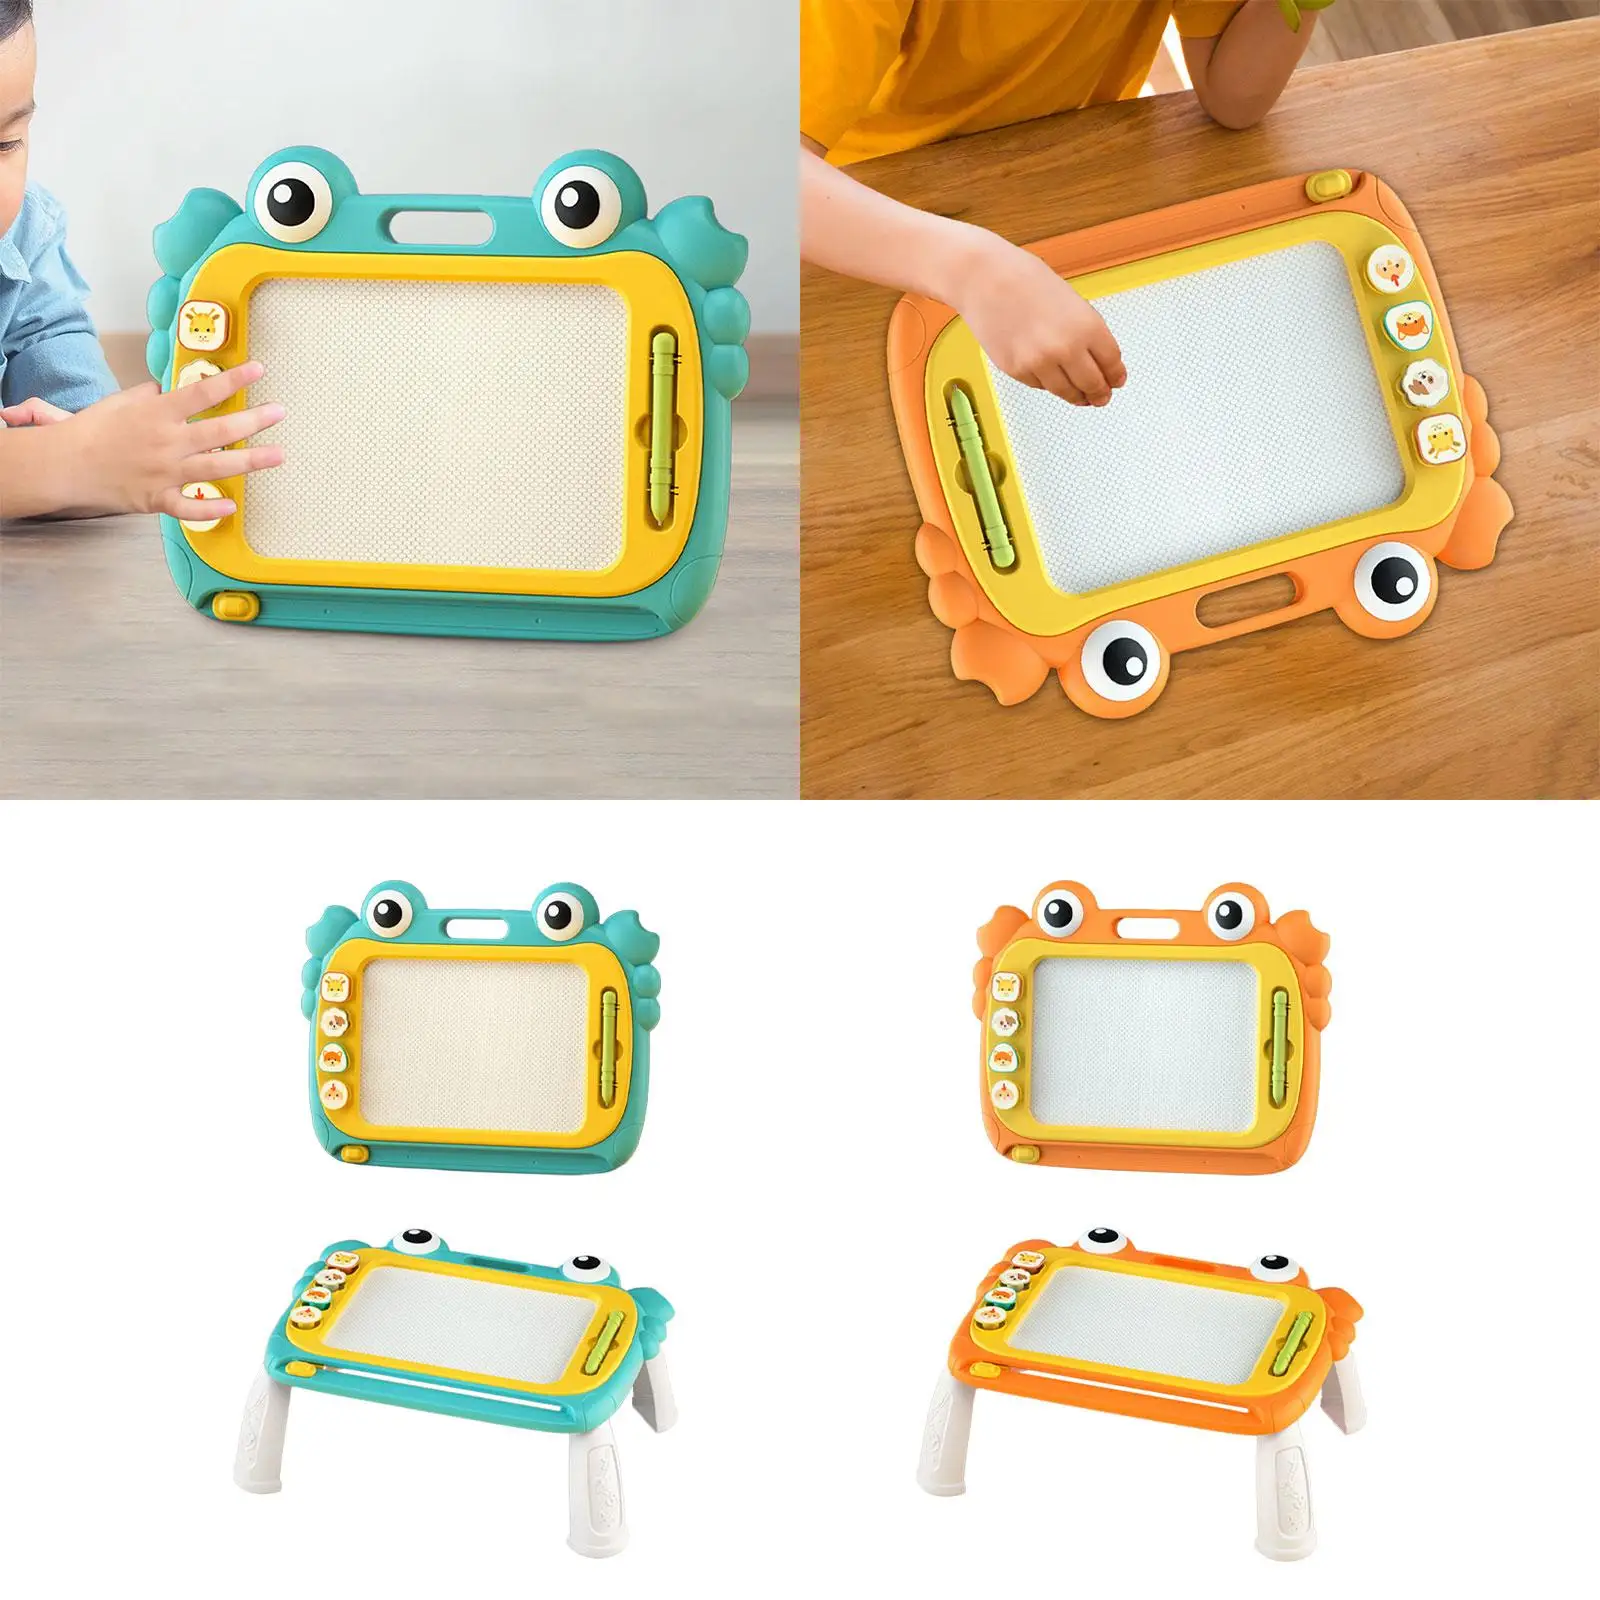 Magnetic Drawing Board Learning Toy with 4 Stampers Writing Painting Sketch Pad for Preschool Toddlers Kids Children Boys Girls